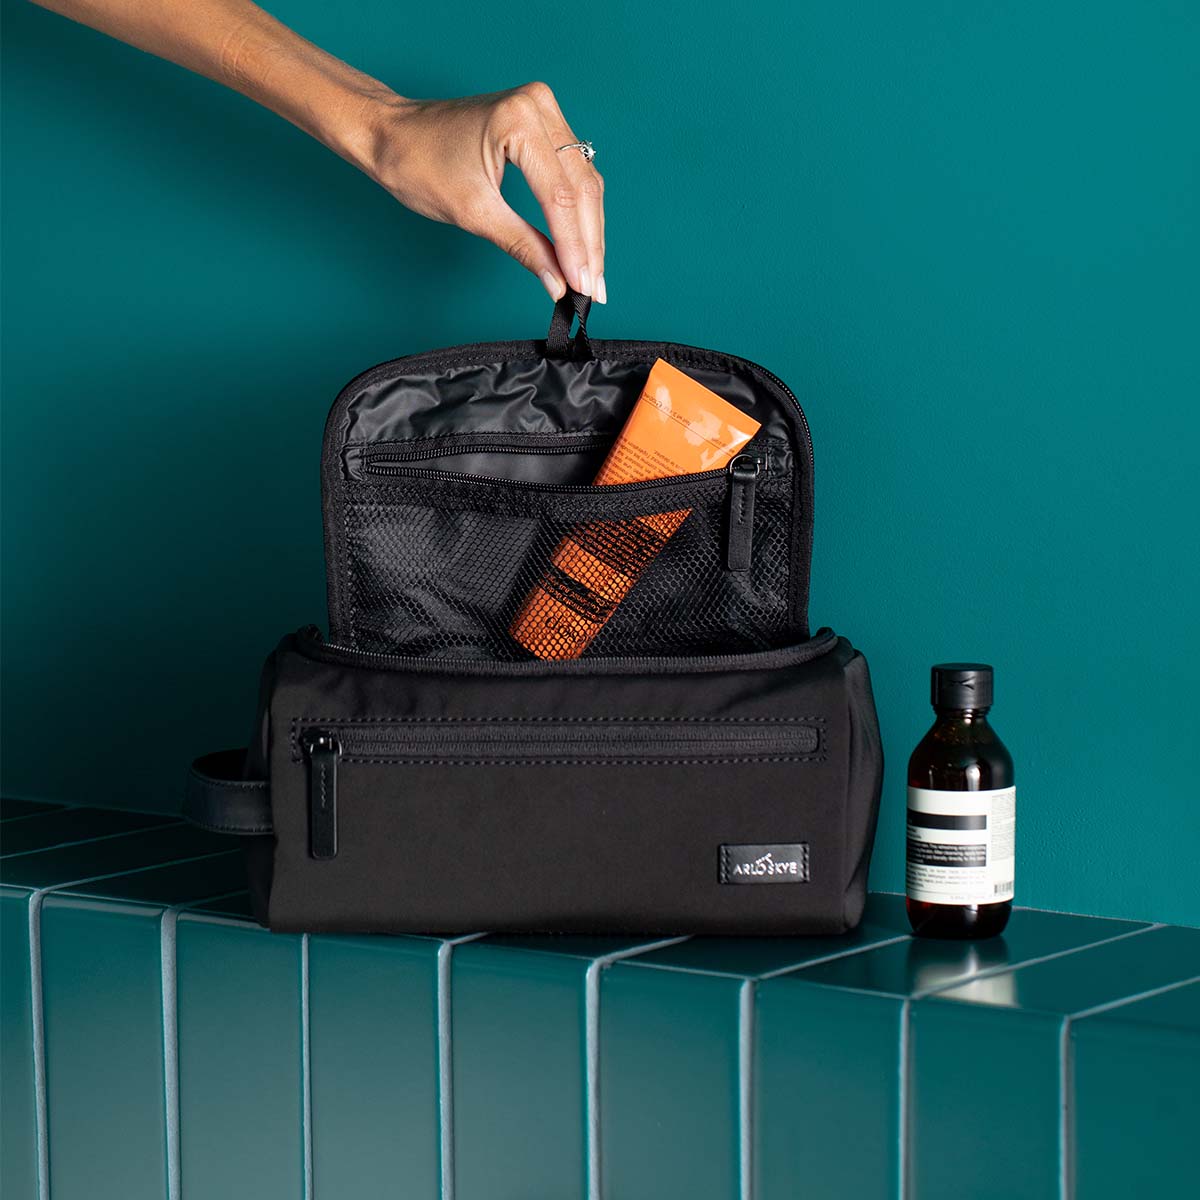 black travel kit with open top featuring some grooming products visible from the inside pockets.